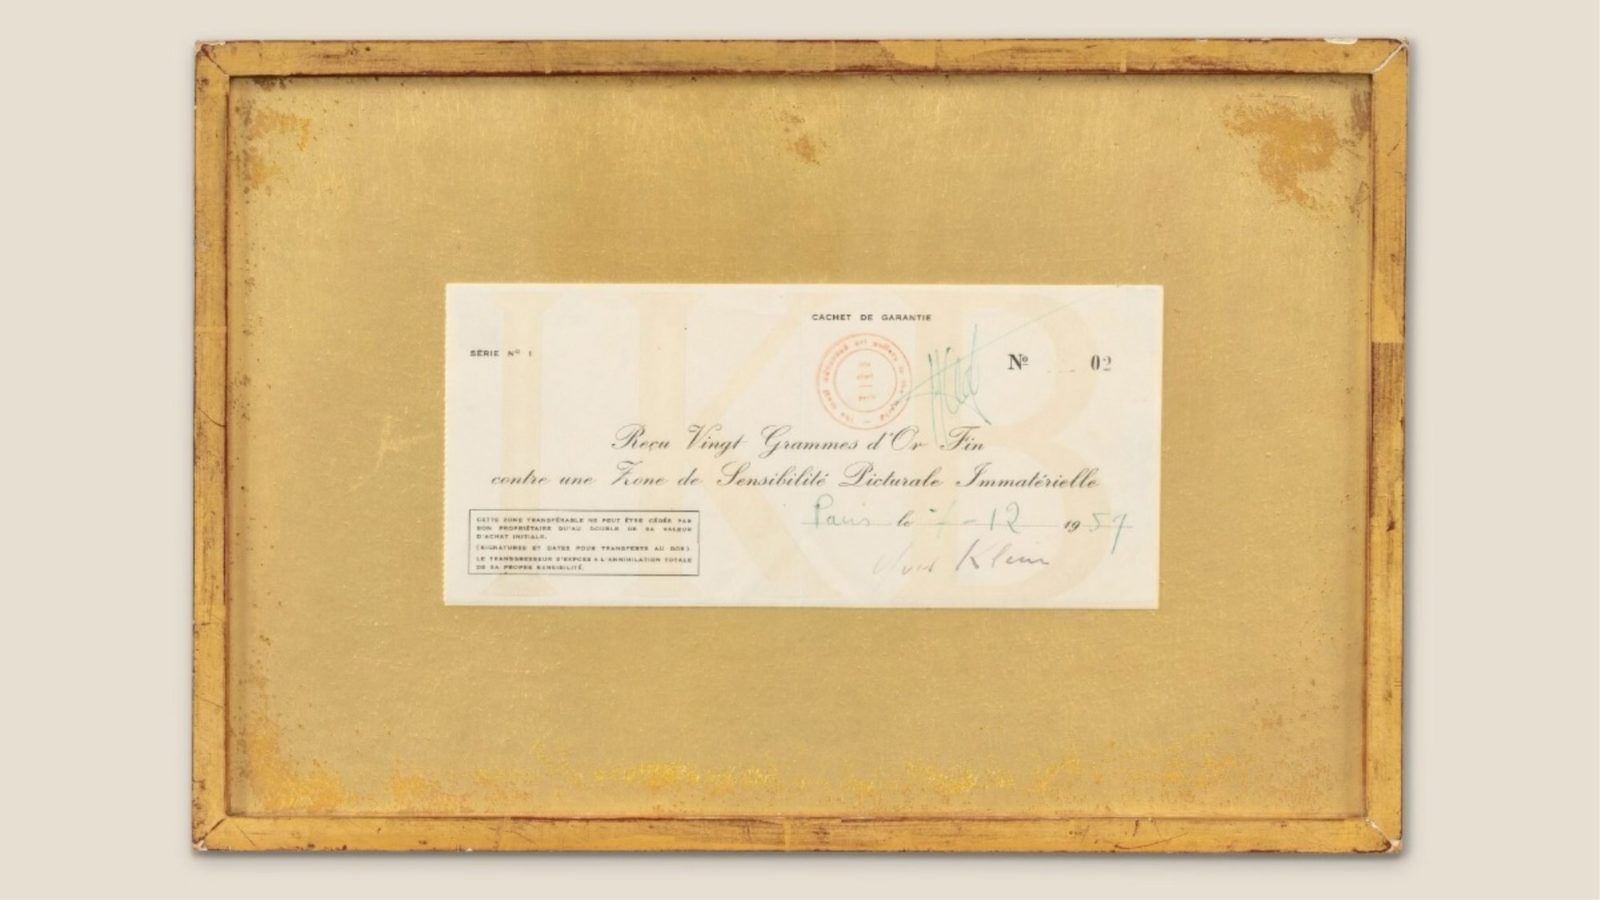 A 1959 Receipt for an Imaginary Piece of Art Might Fetch Upwards of US$500,000 at a Sotheby’s Auction